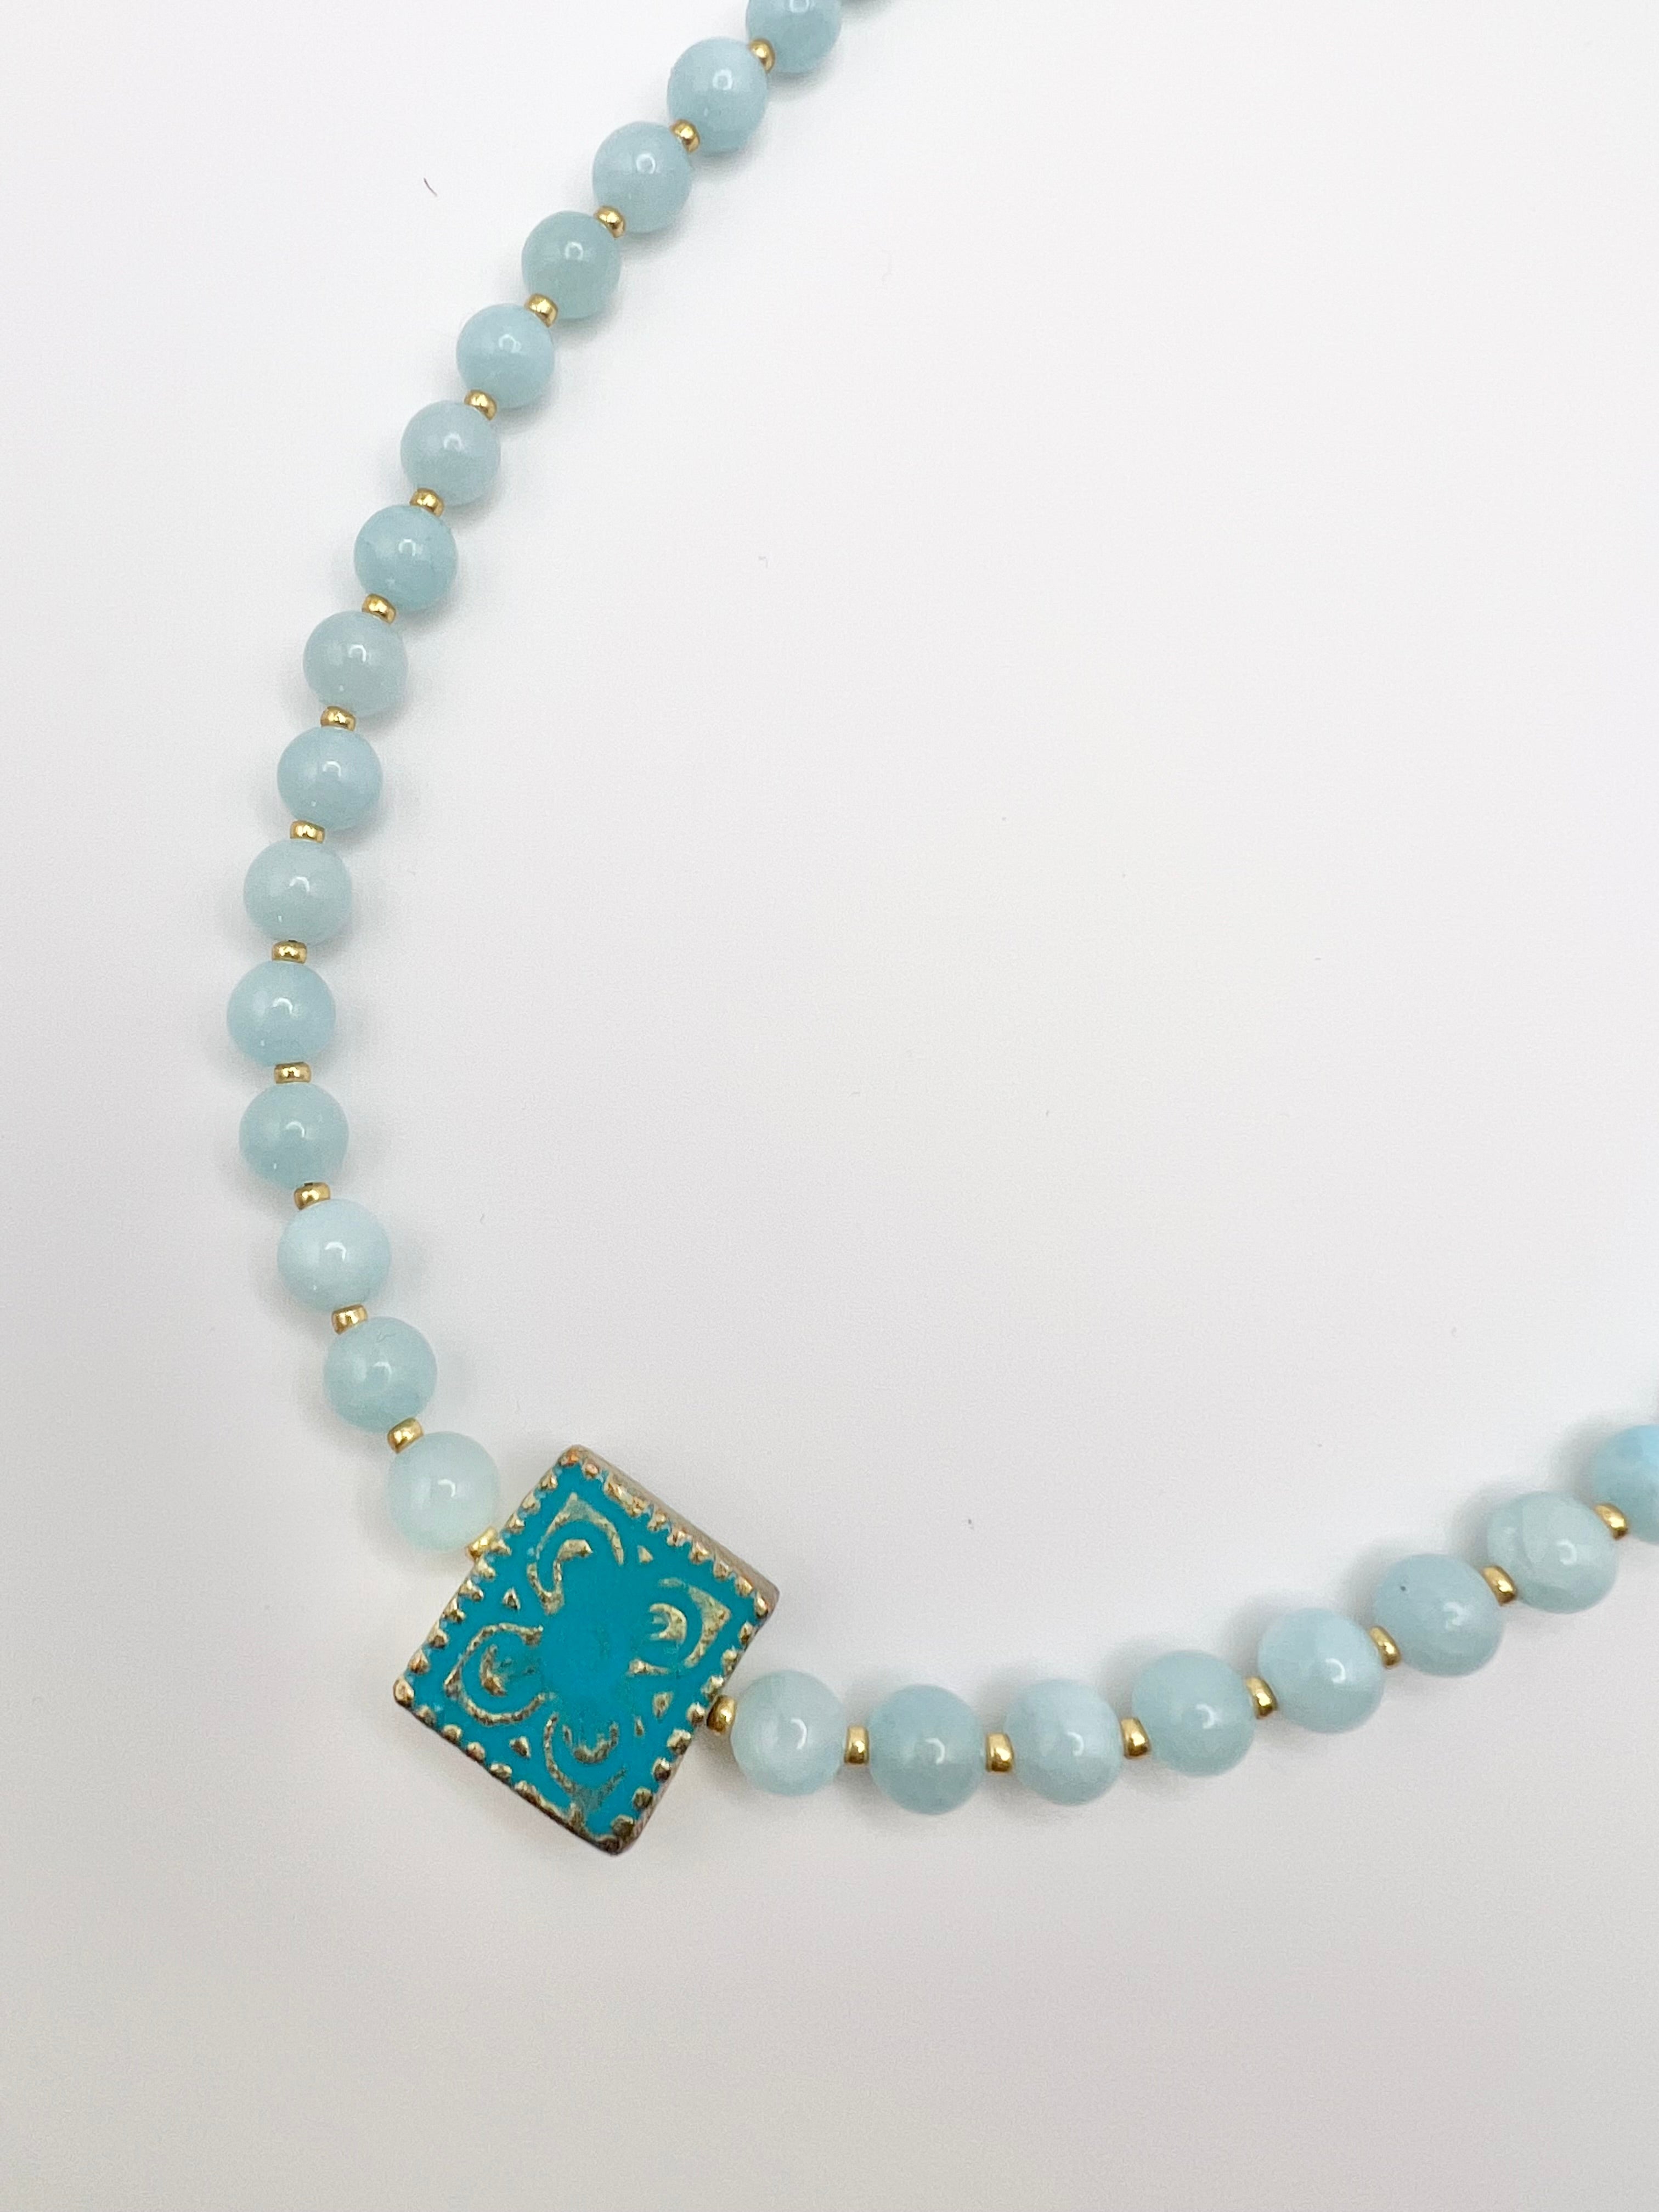 Dainty Blue Beaded Necklace